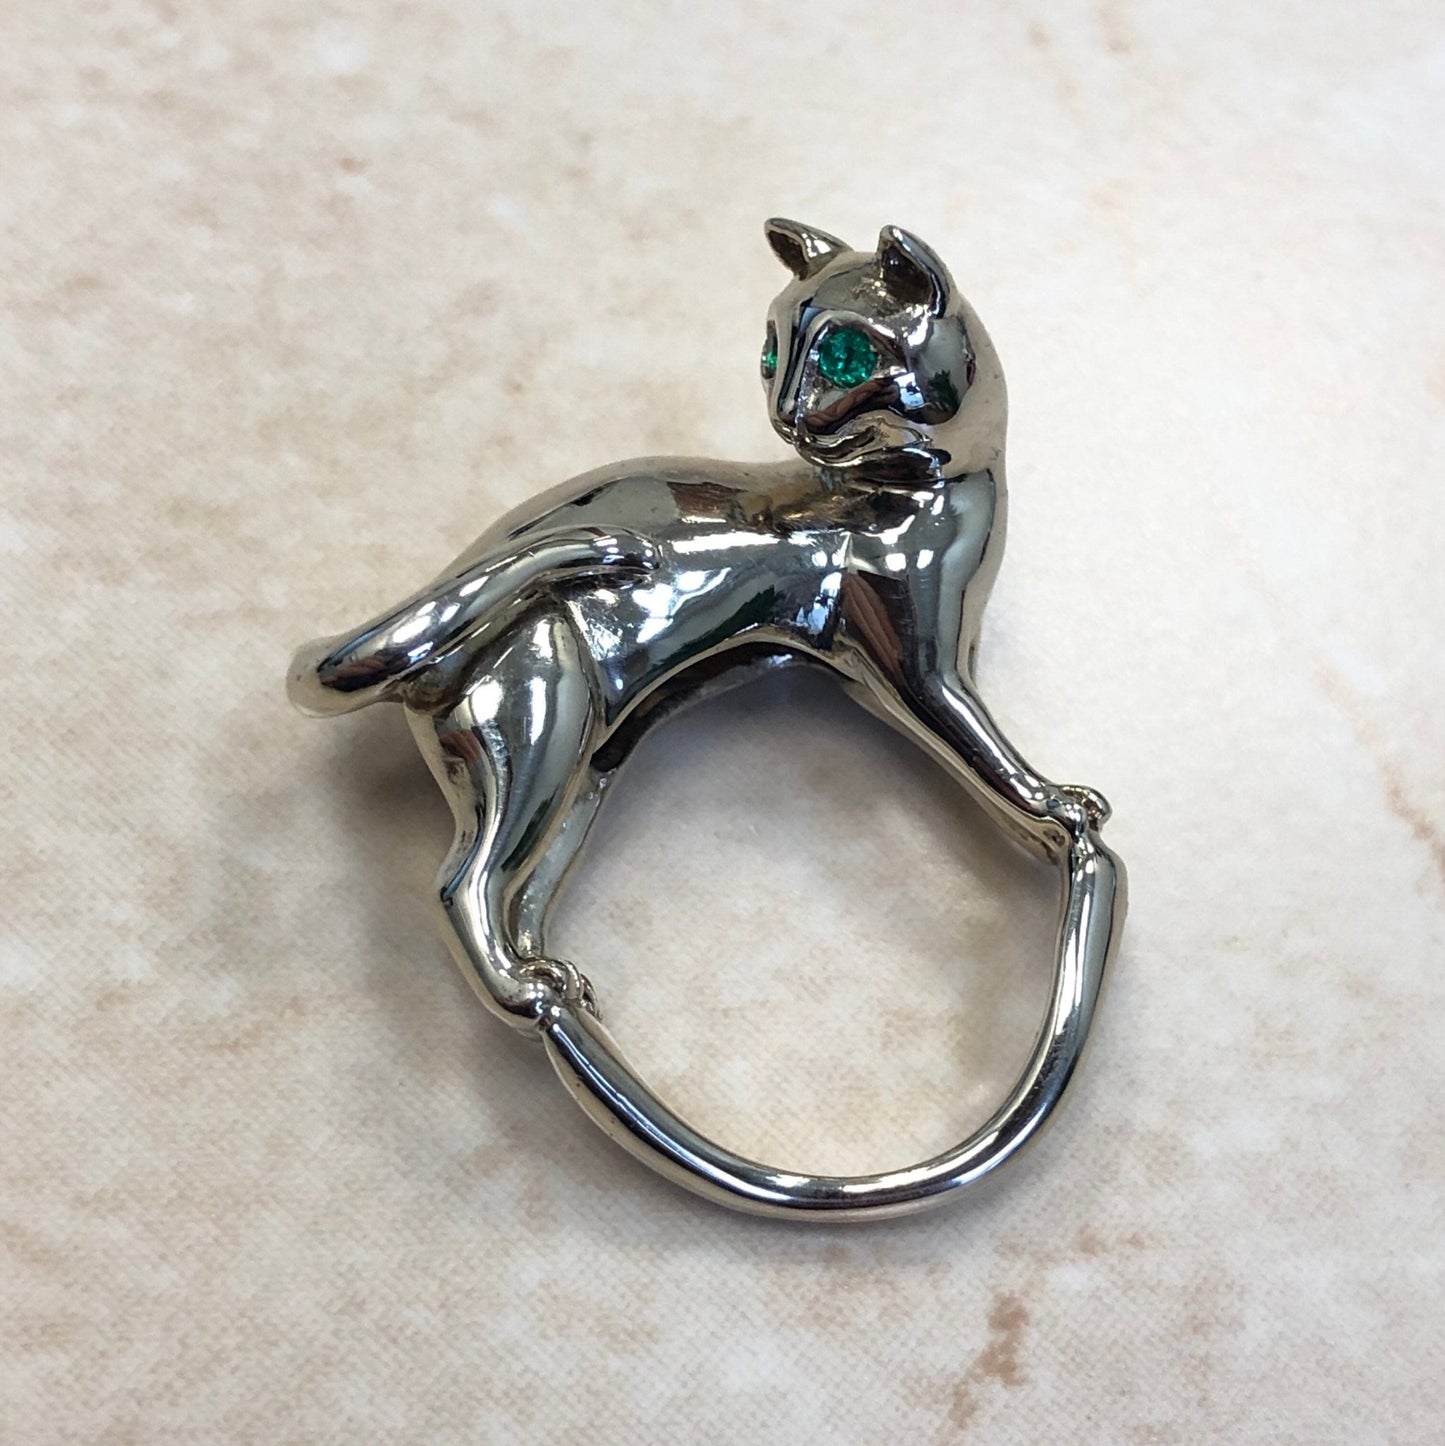 18K Emerald Cat Ring By Carvin French - Cat Jewelry - Animal Jewelry - White Gold - Cocktail Ring - Statement Ring - Emerald Ring - Size 6